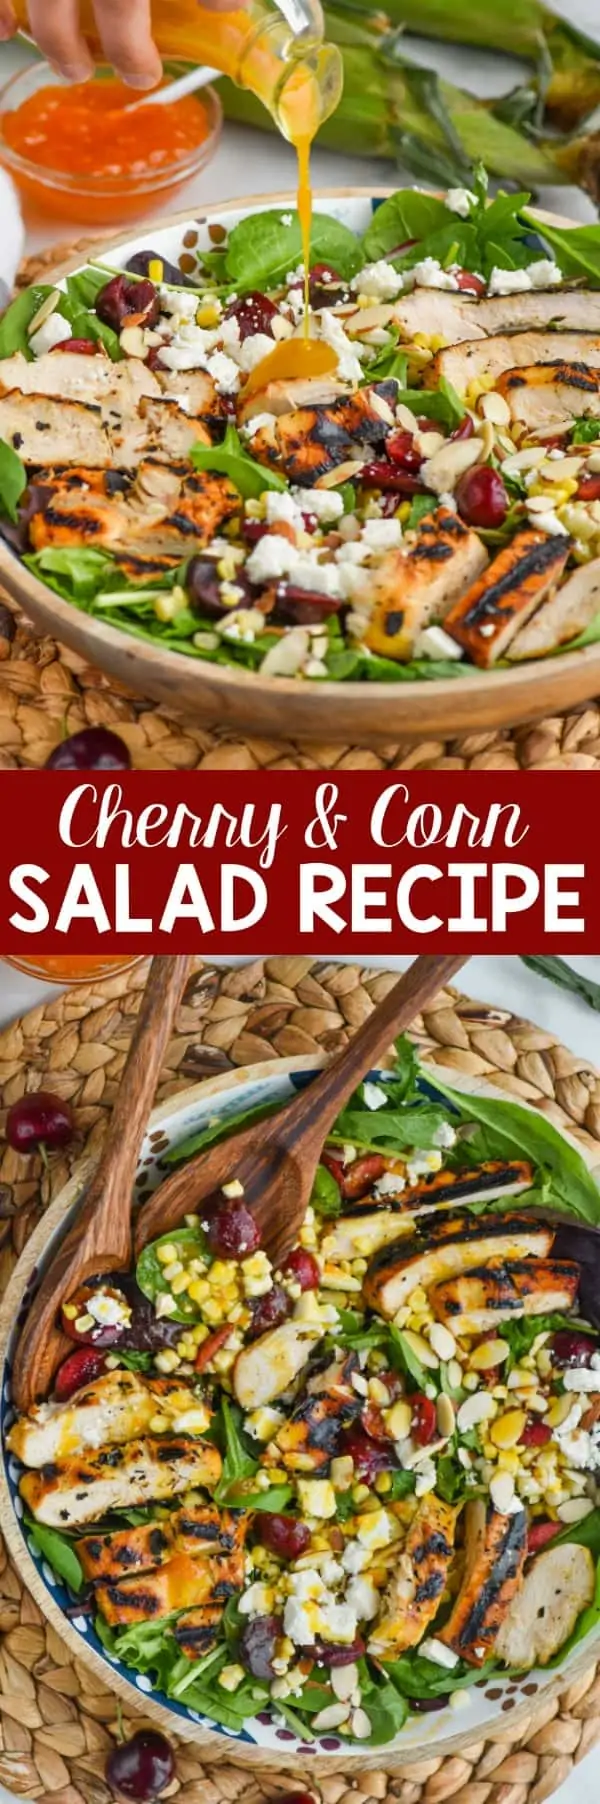 A collage of two photos: the salad dressing is being poured on top of the salad and an overhead photo of the Cherry and Corn Salad